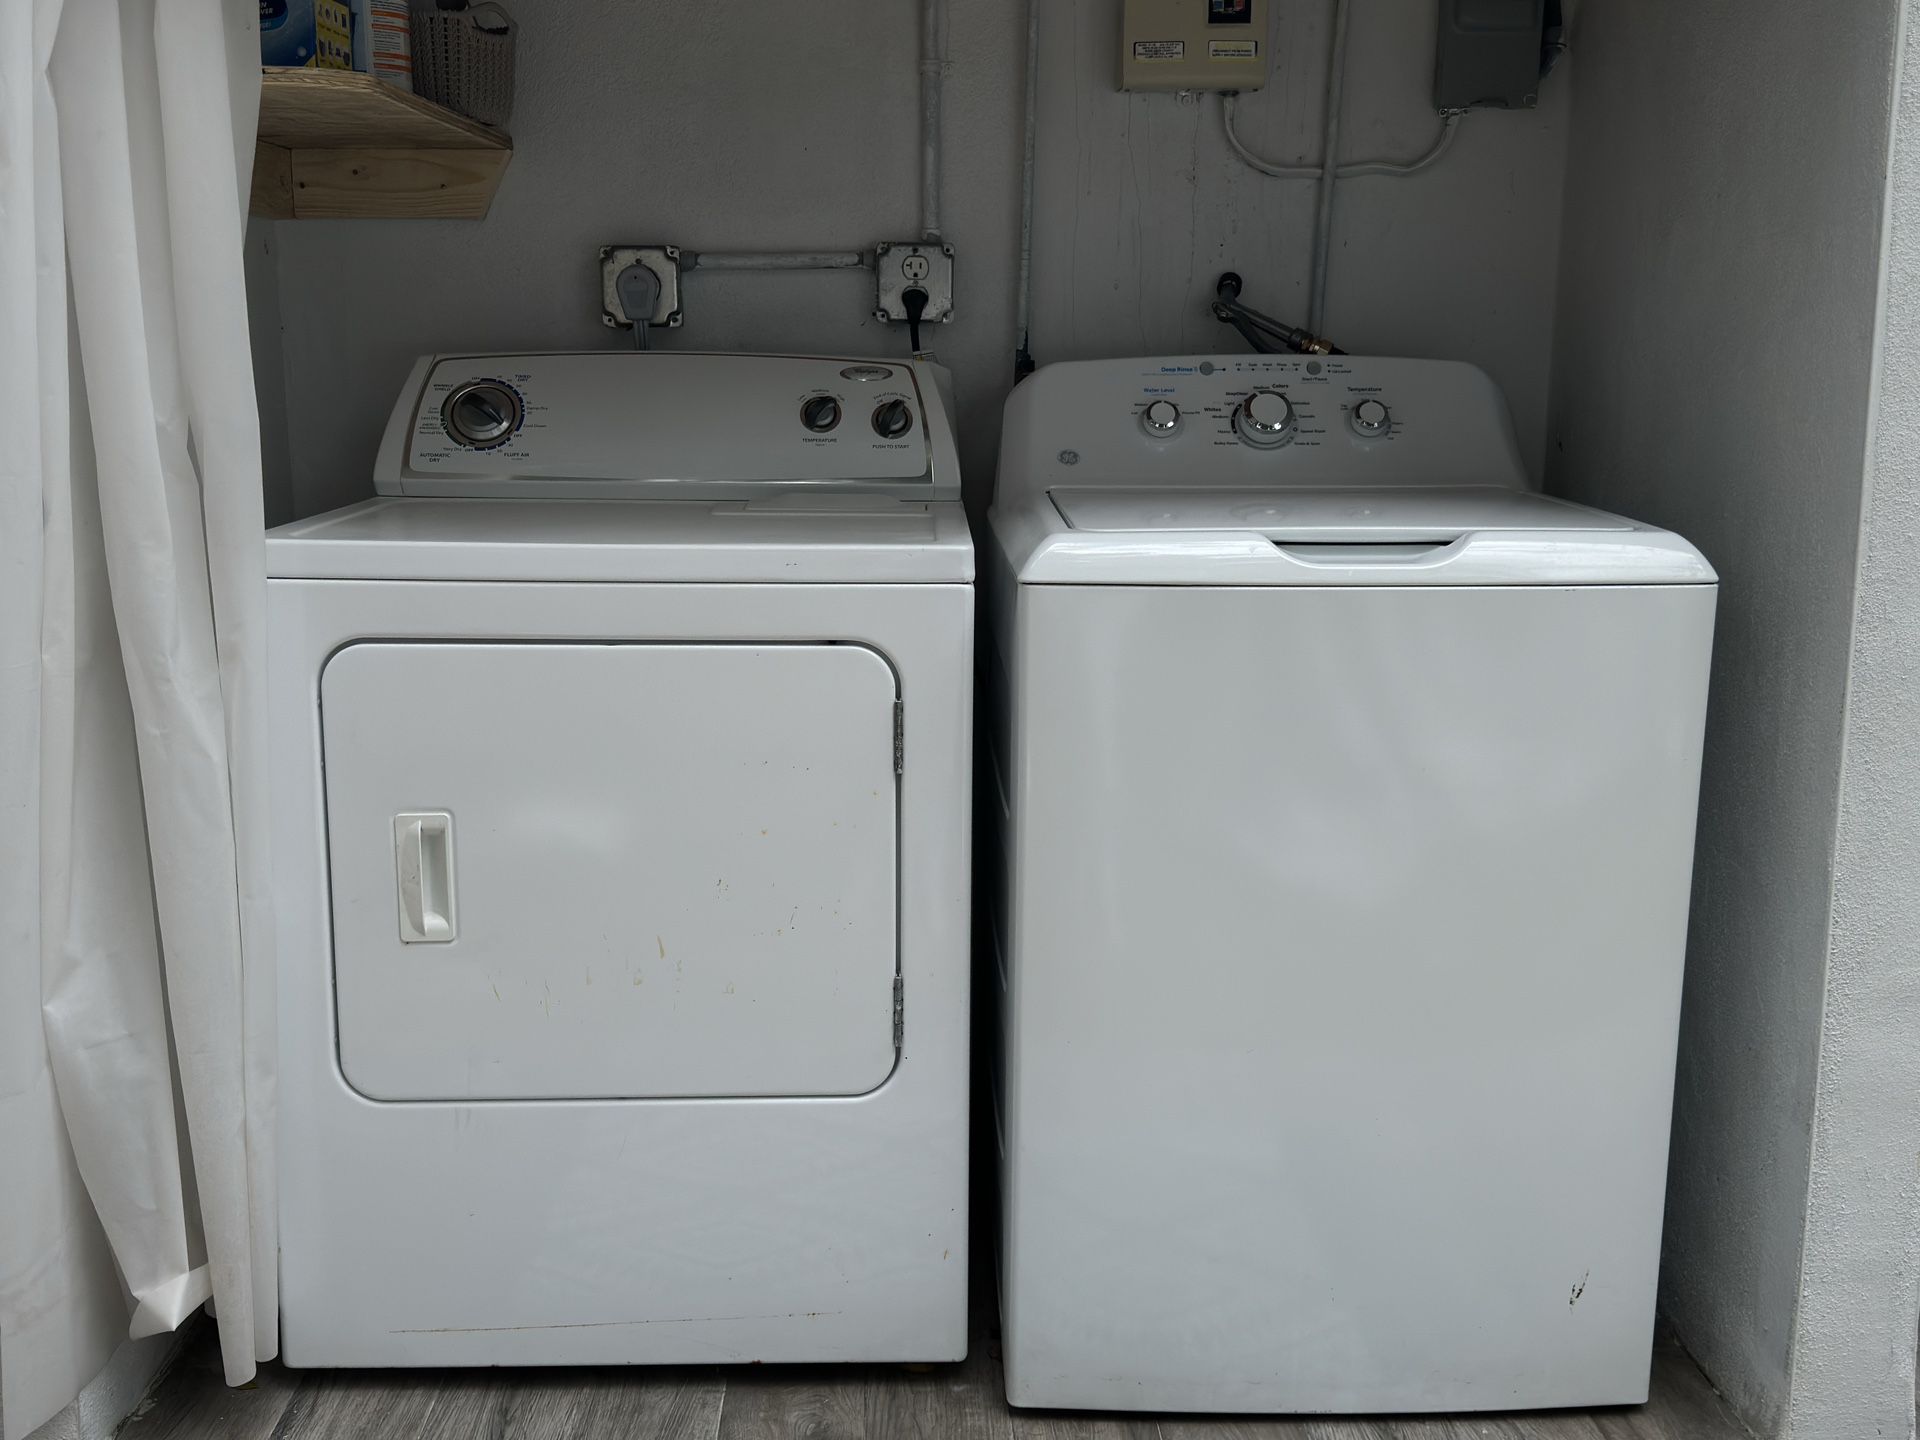 Washer & Dryer In Awesome Condition! Willing To Sell Together Or Separate